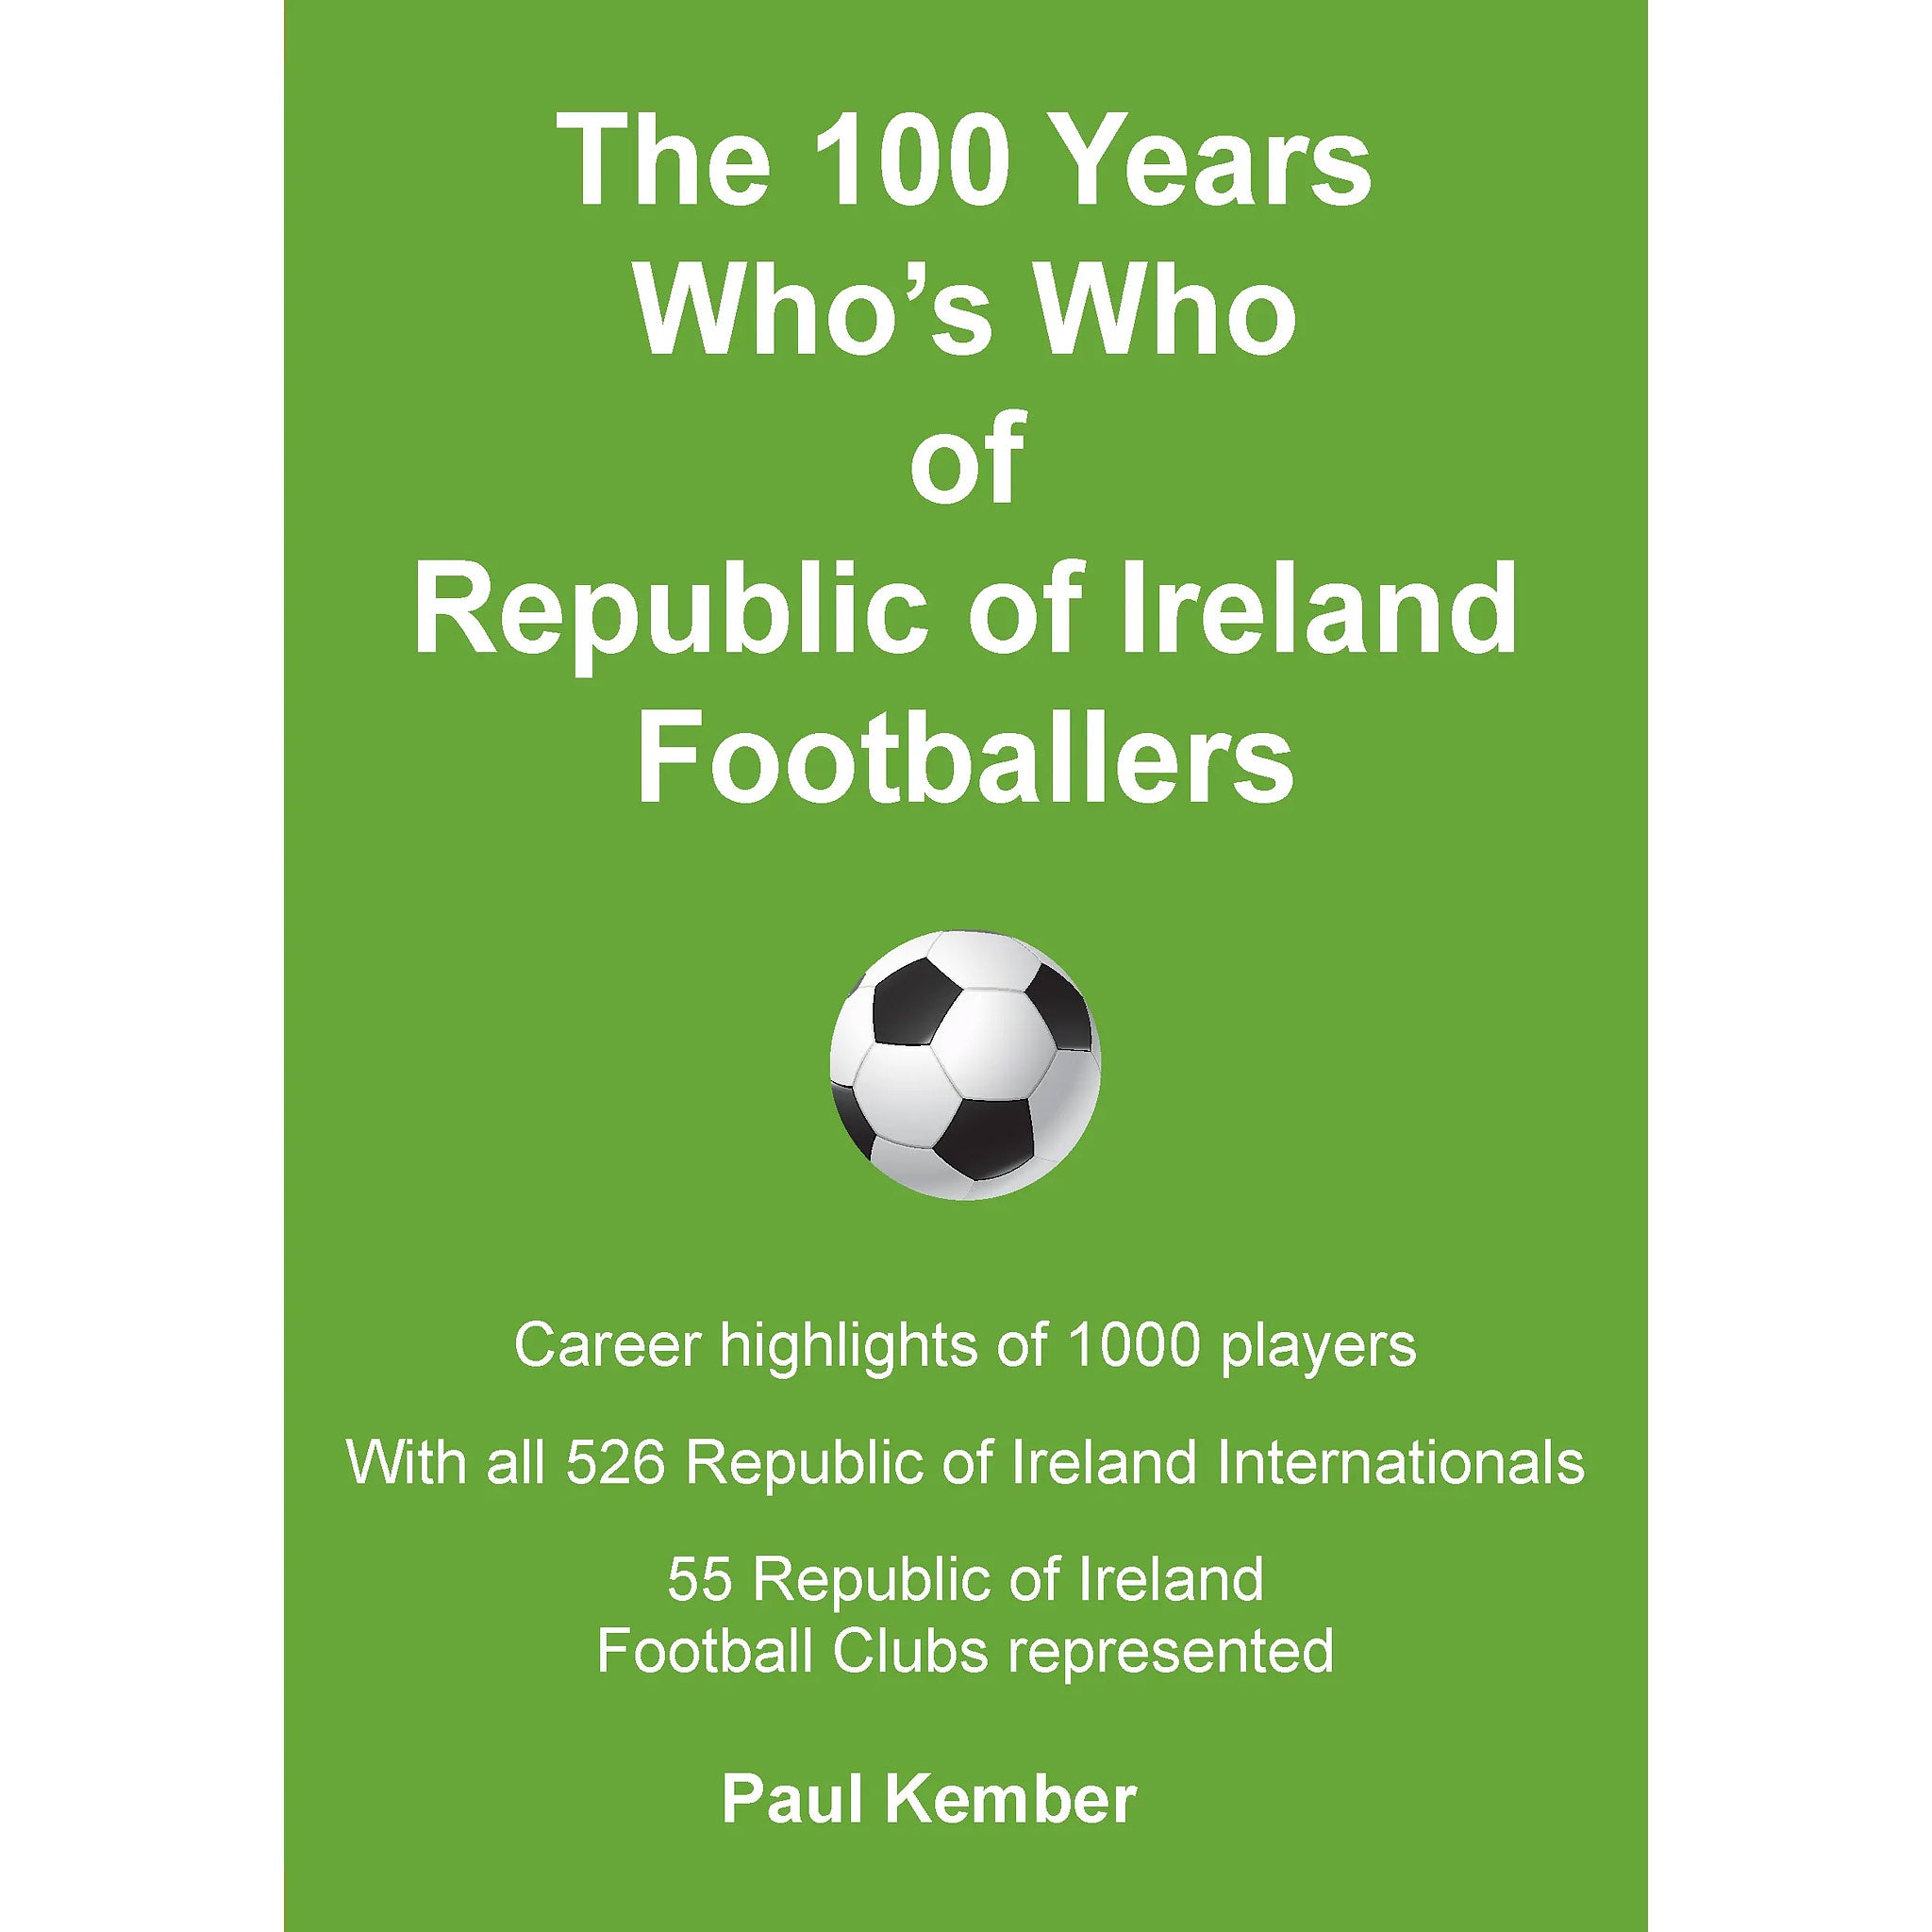 The 100 Years Who's Who of Republic of Ireland Footballers